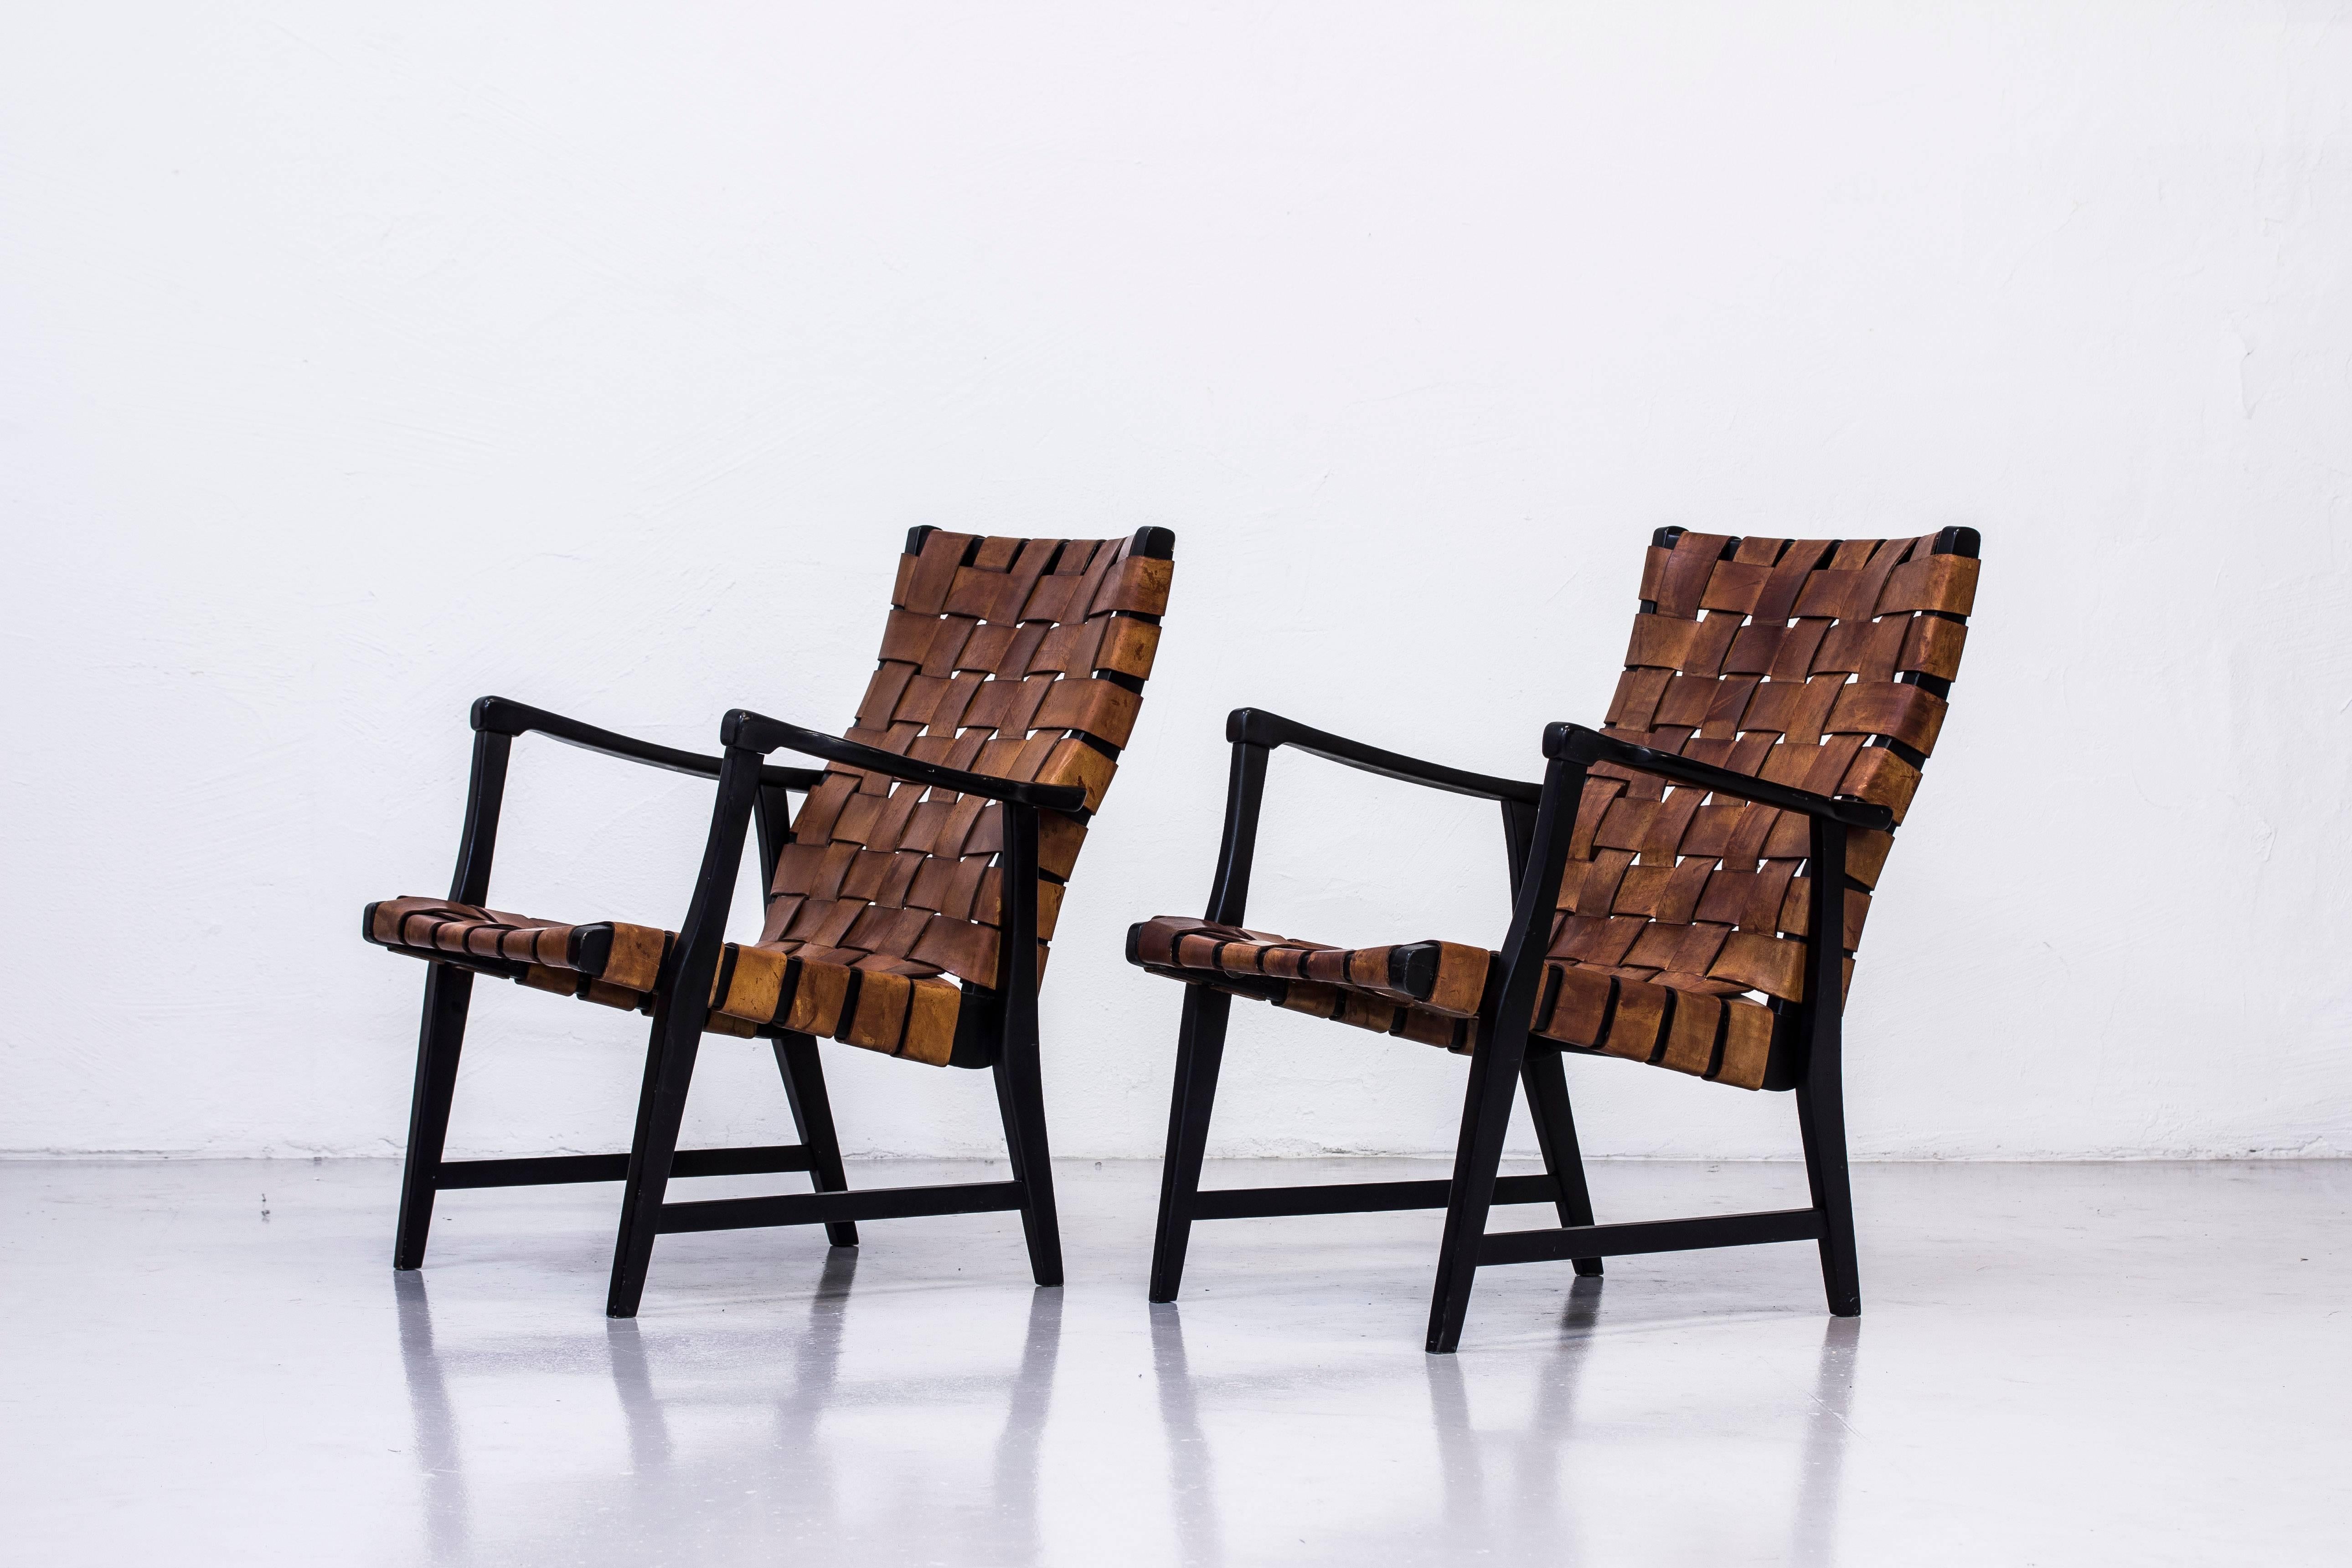 Rare pair of easy chairs designed by Elias Svedberg. Produced in Sweden by Nordiska Kompaniet during the 1940s. Black lacquered beech frame with thick cognac leather straps with great patina. Very good condition with age related wear and light